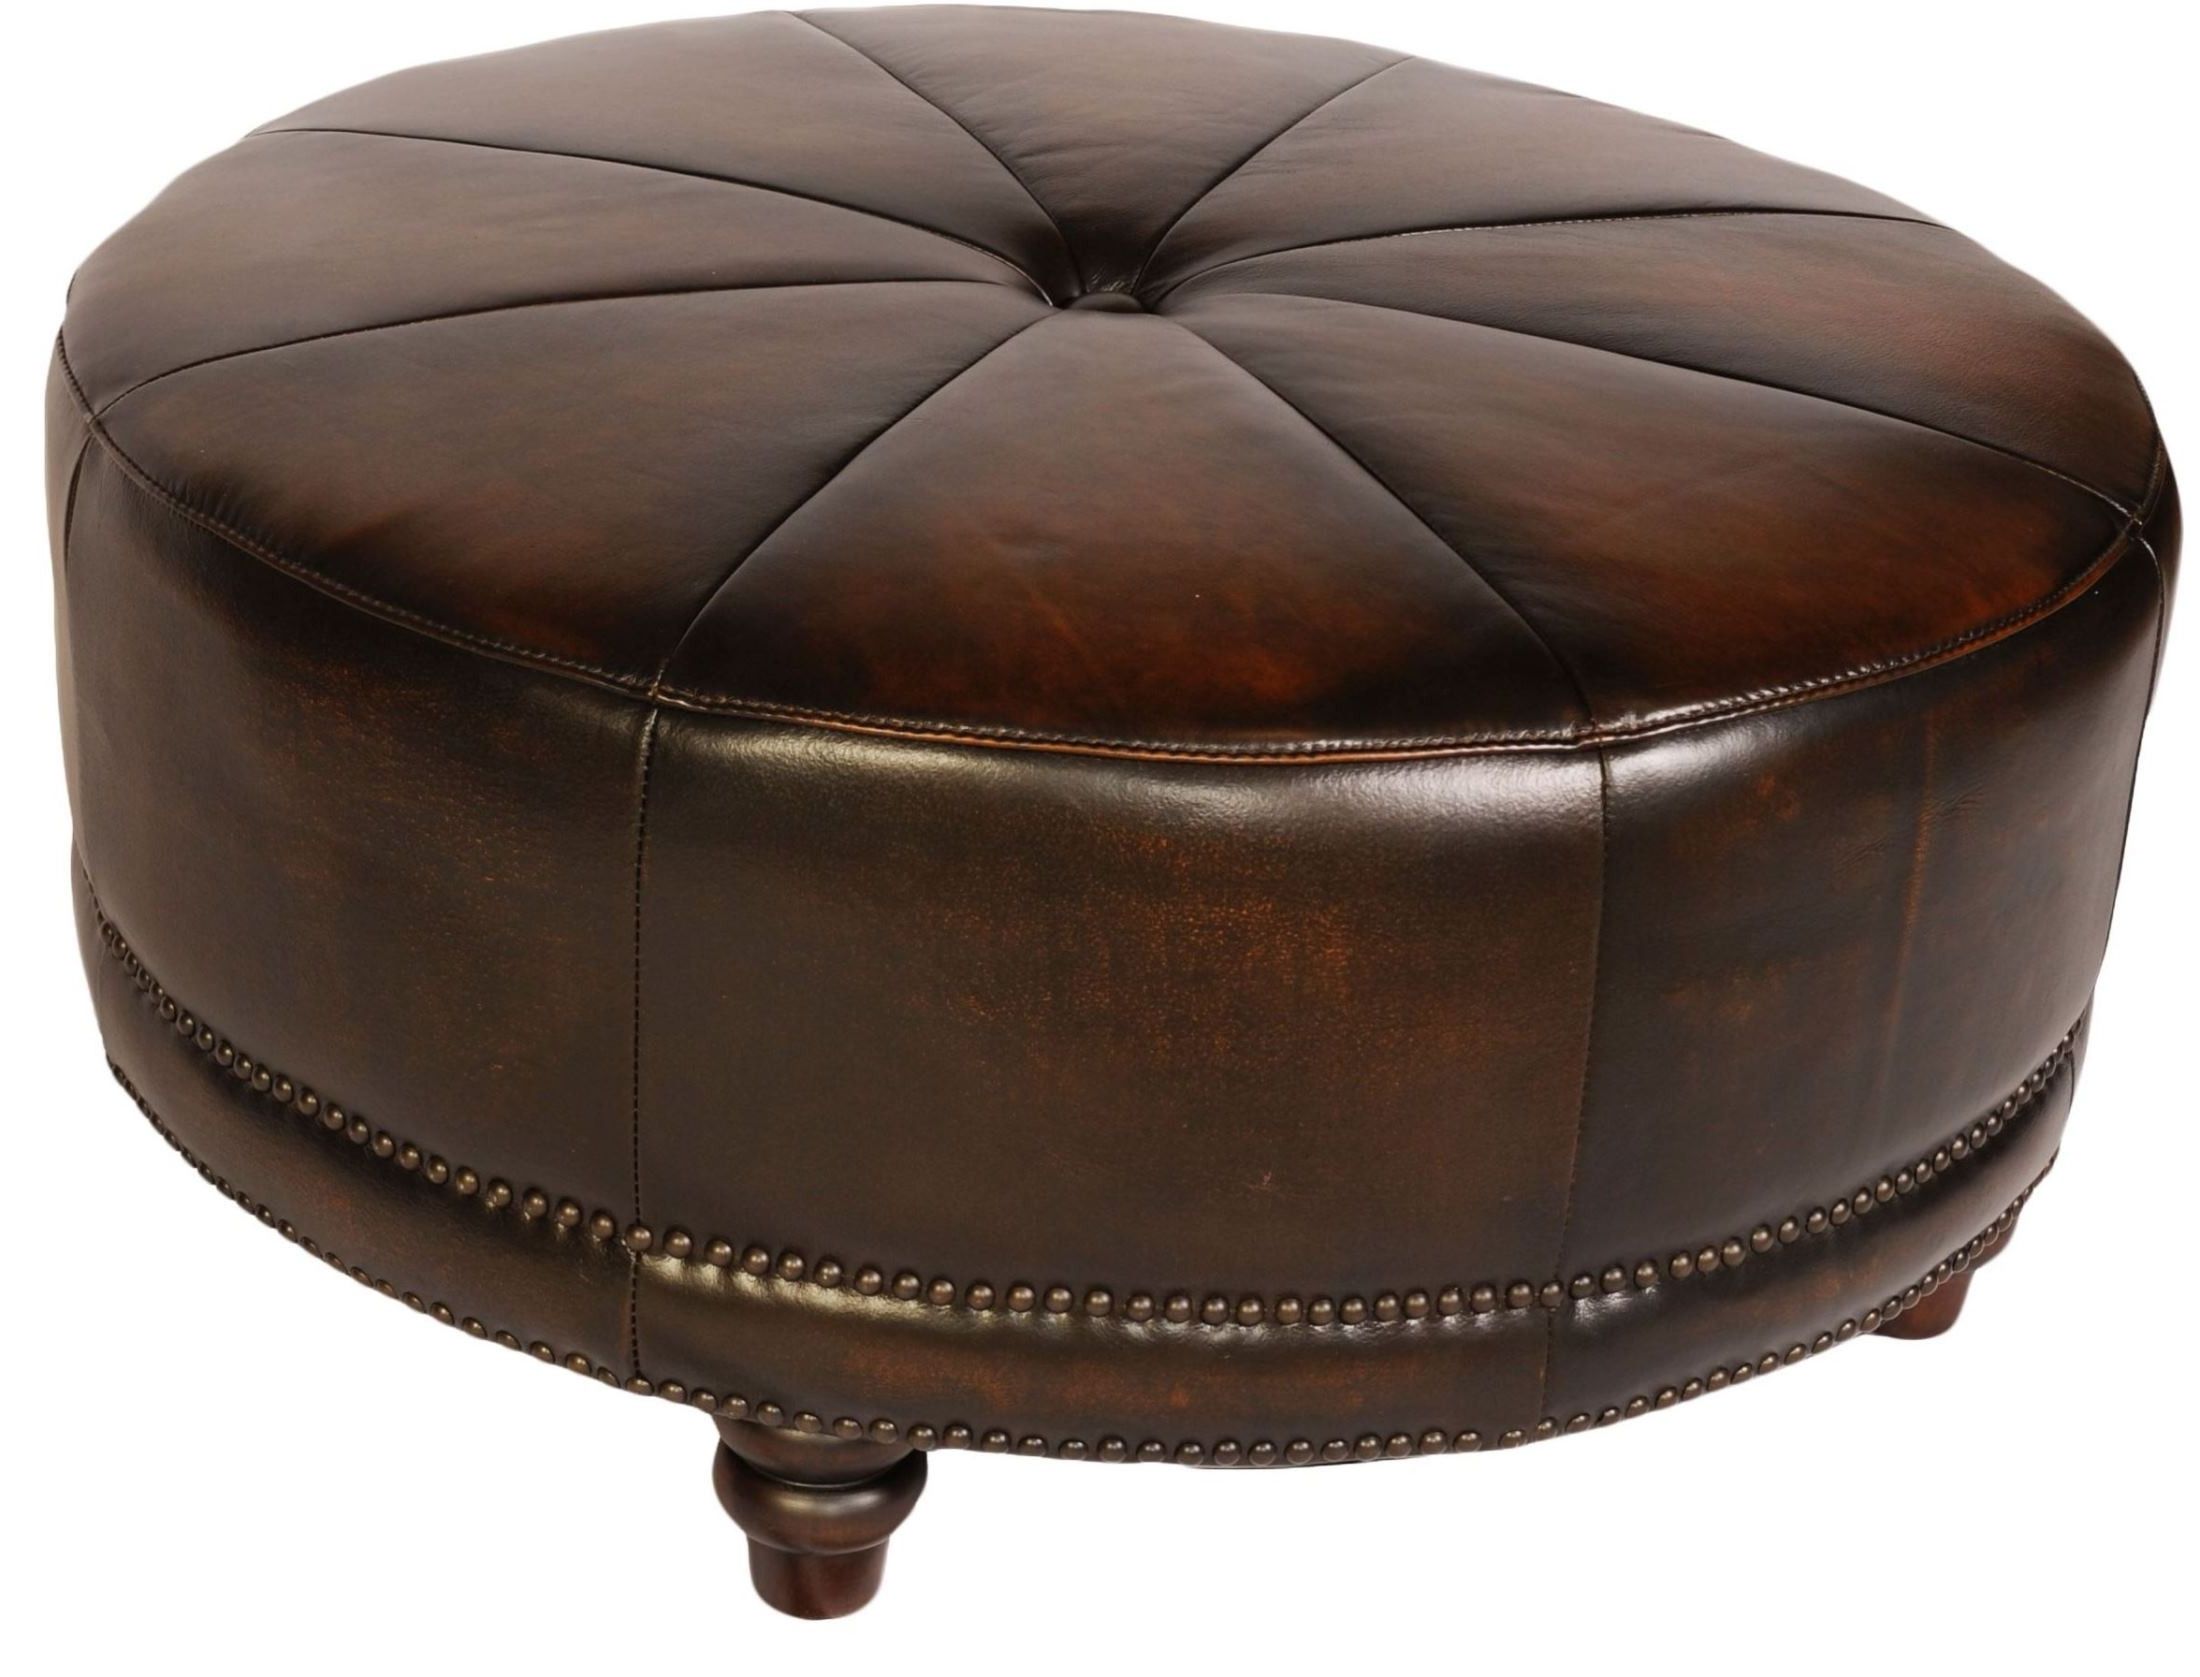 Cindy Black & Tan Leather Round Ottoman From Lazzaro (wh F371 3358b In Recent Black Leather Foot Stools (View 3 of 10)